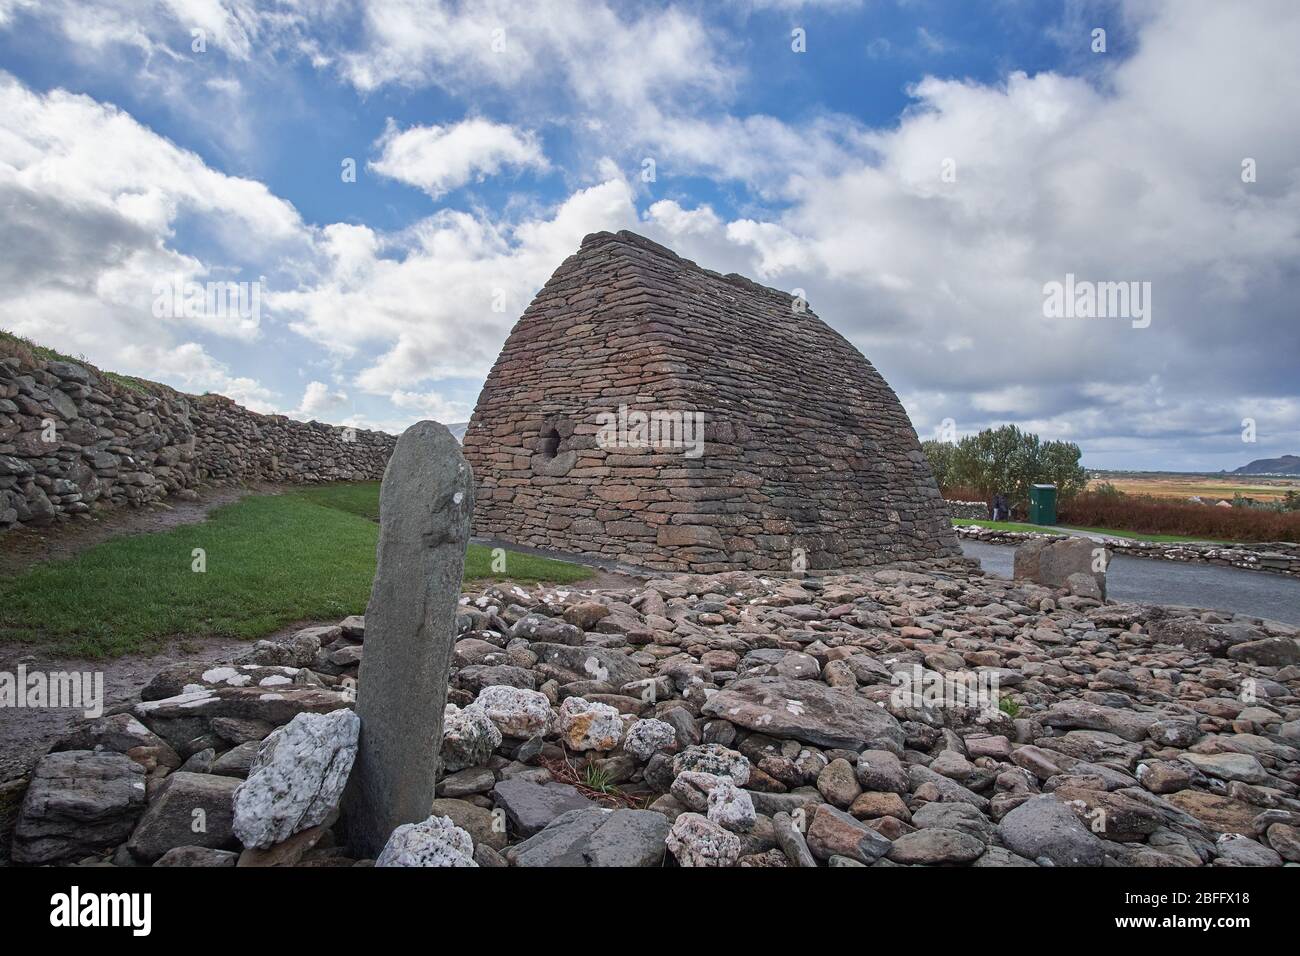 Exterior view on the Gallarus Oratory in Dingle Peninsula County Kerry Ireland showing the Colum Mac Dinet stone in foreground. Stock Photo